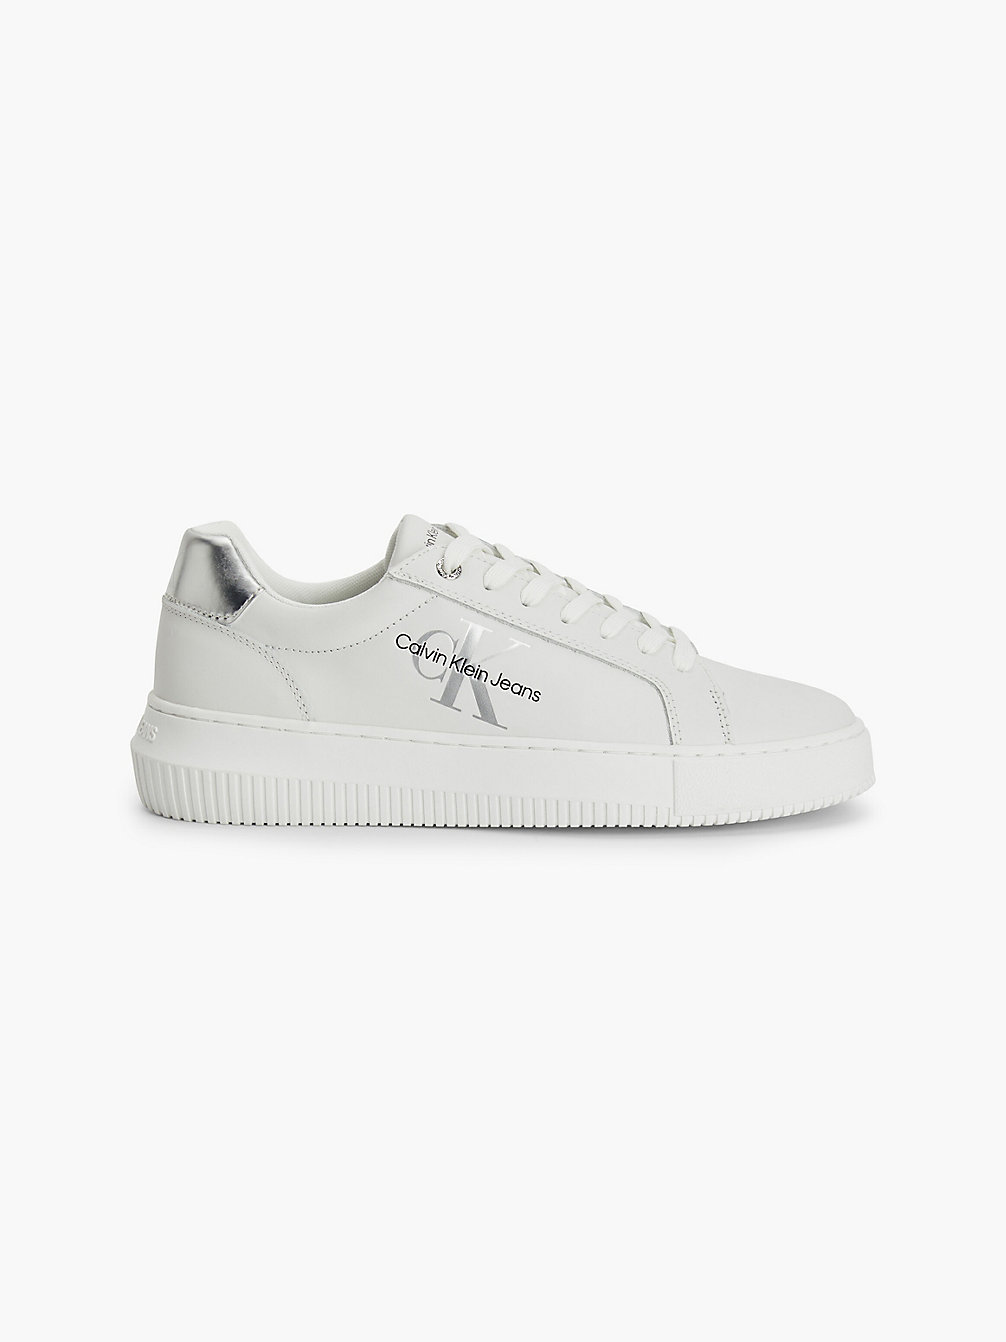 WHITE/SILVER Leather Trainers undefined women Calvin Klein